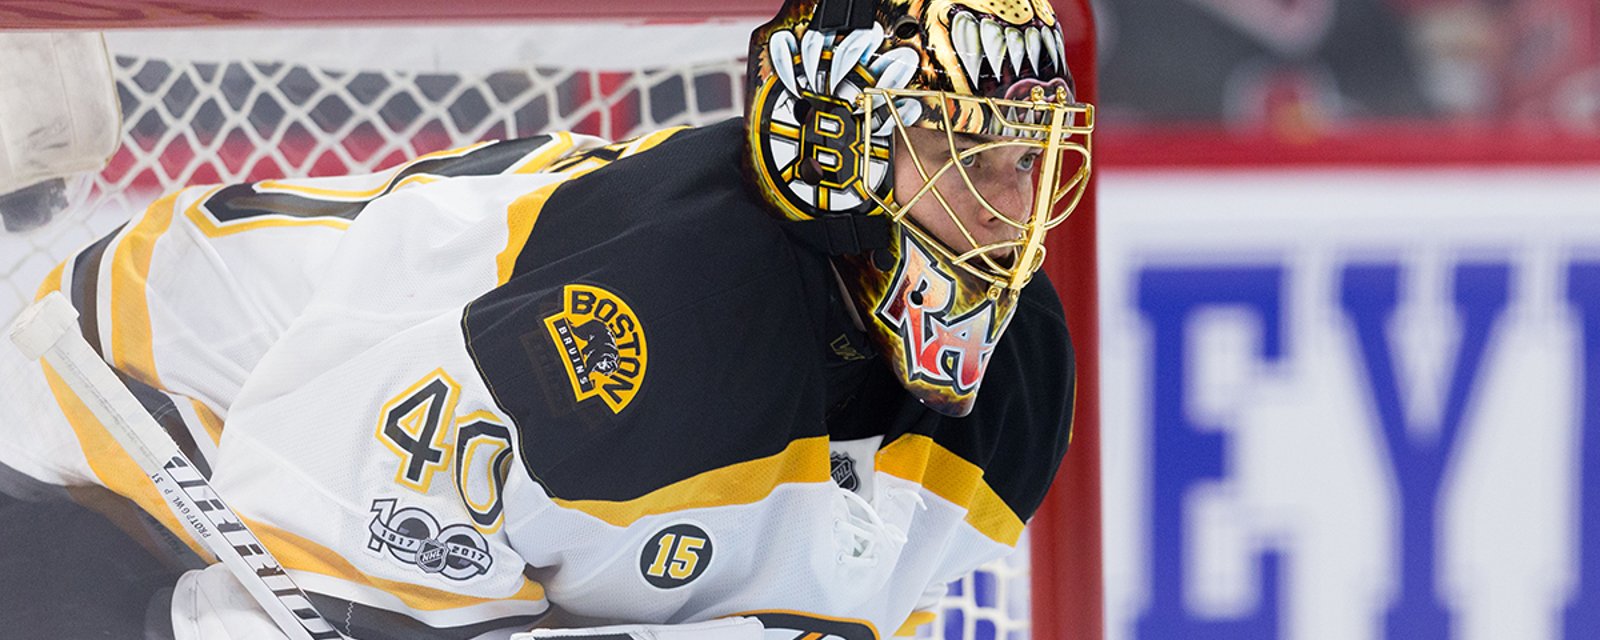 Injury Report: Cassidy provides update on Rask